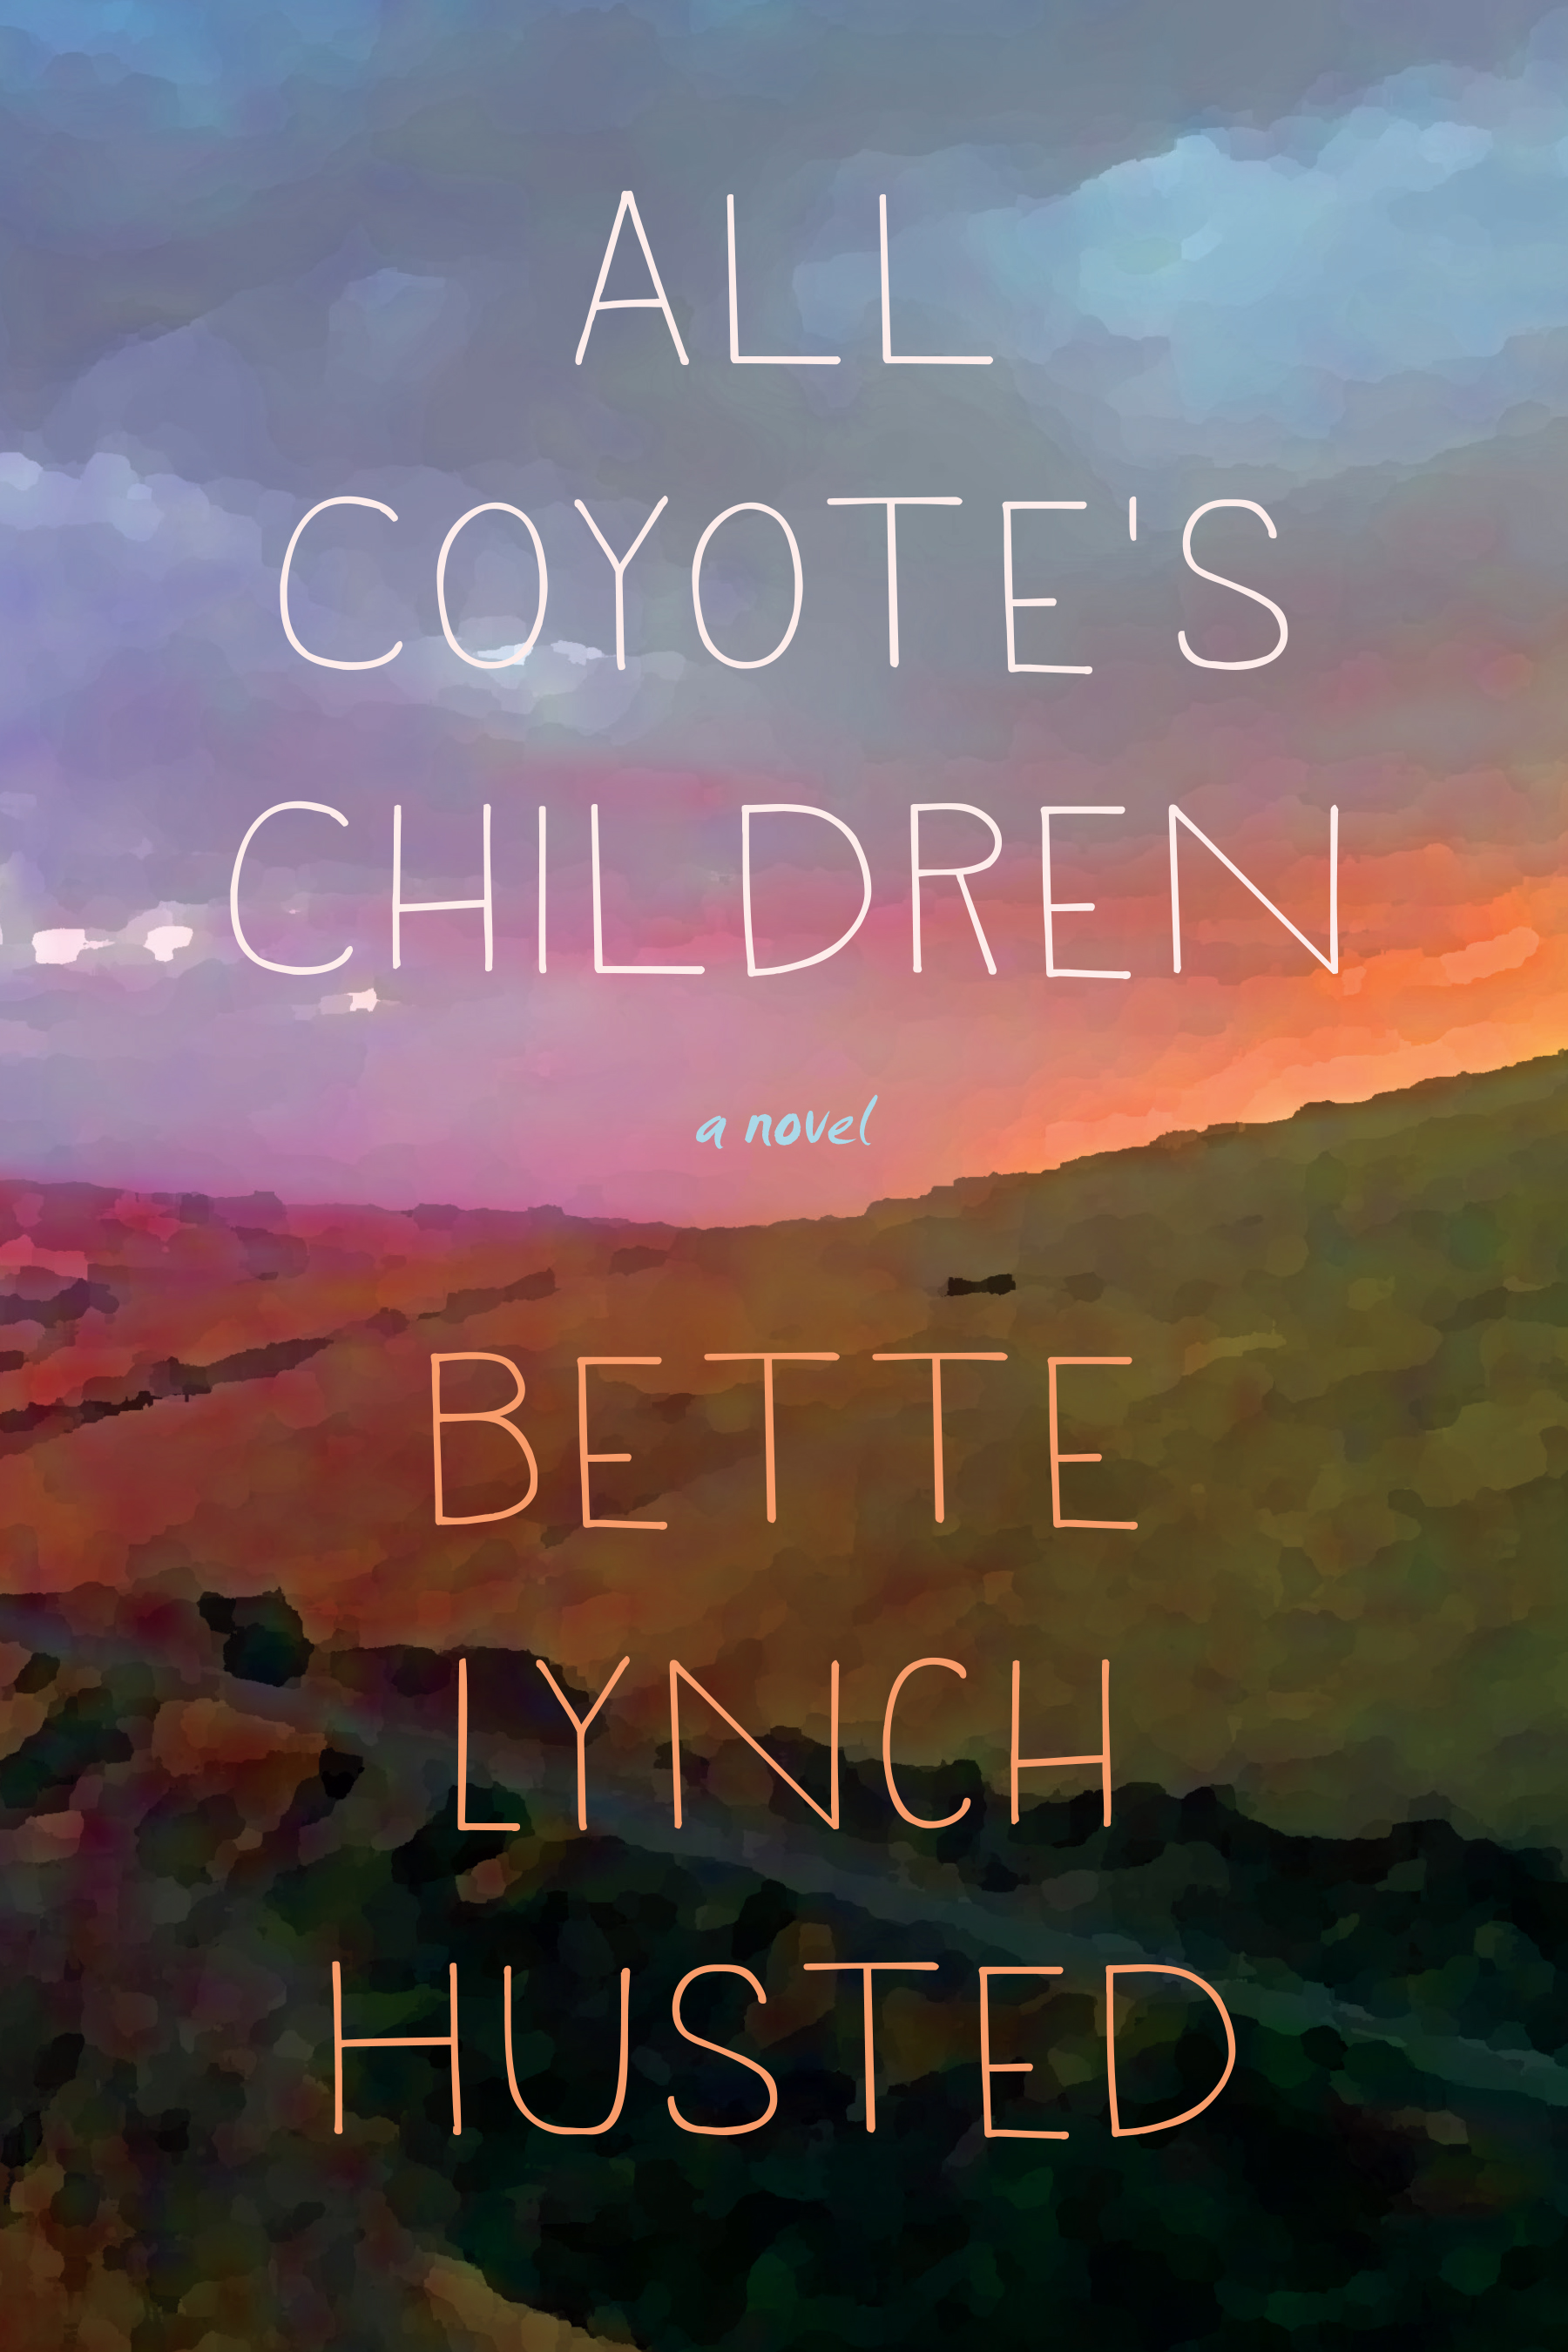 "All Coyote's Children" by Bette Lynch Husted